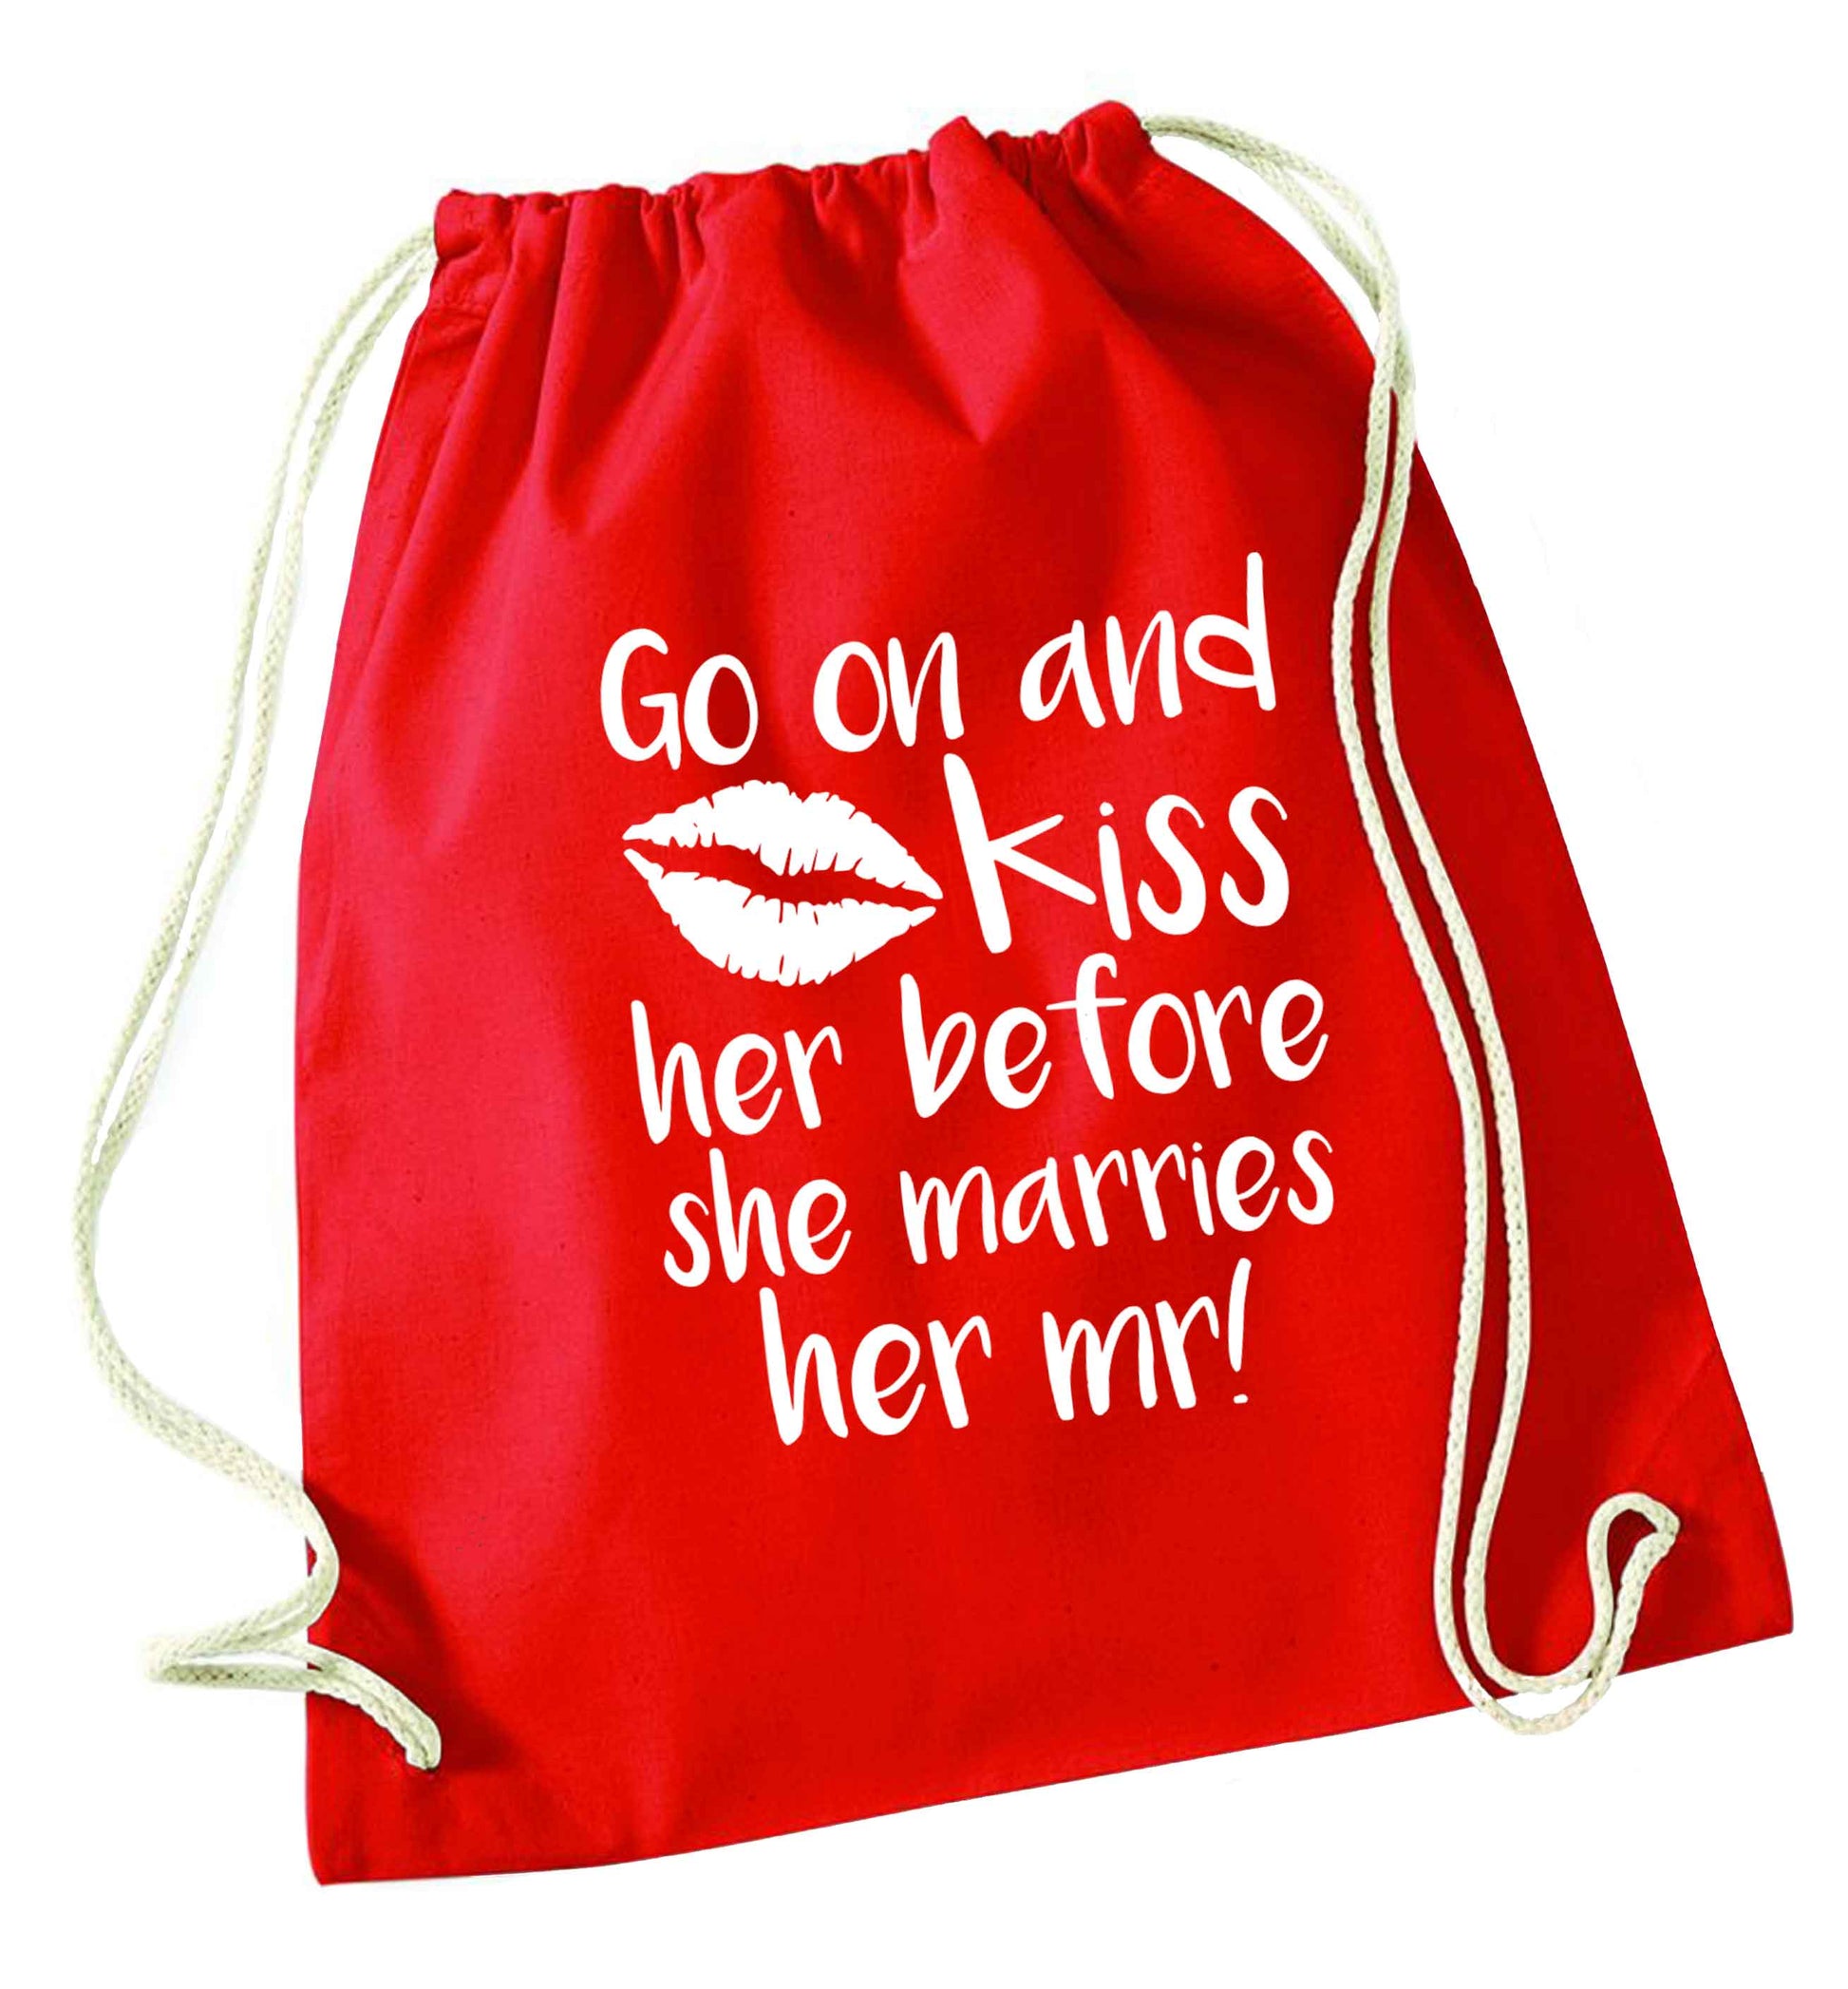 Kiss her before she marries her mr! red drawstring bag 